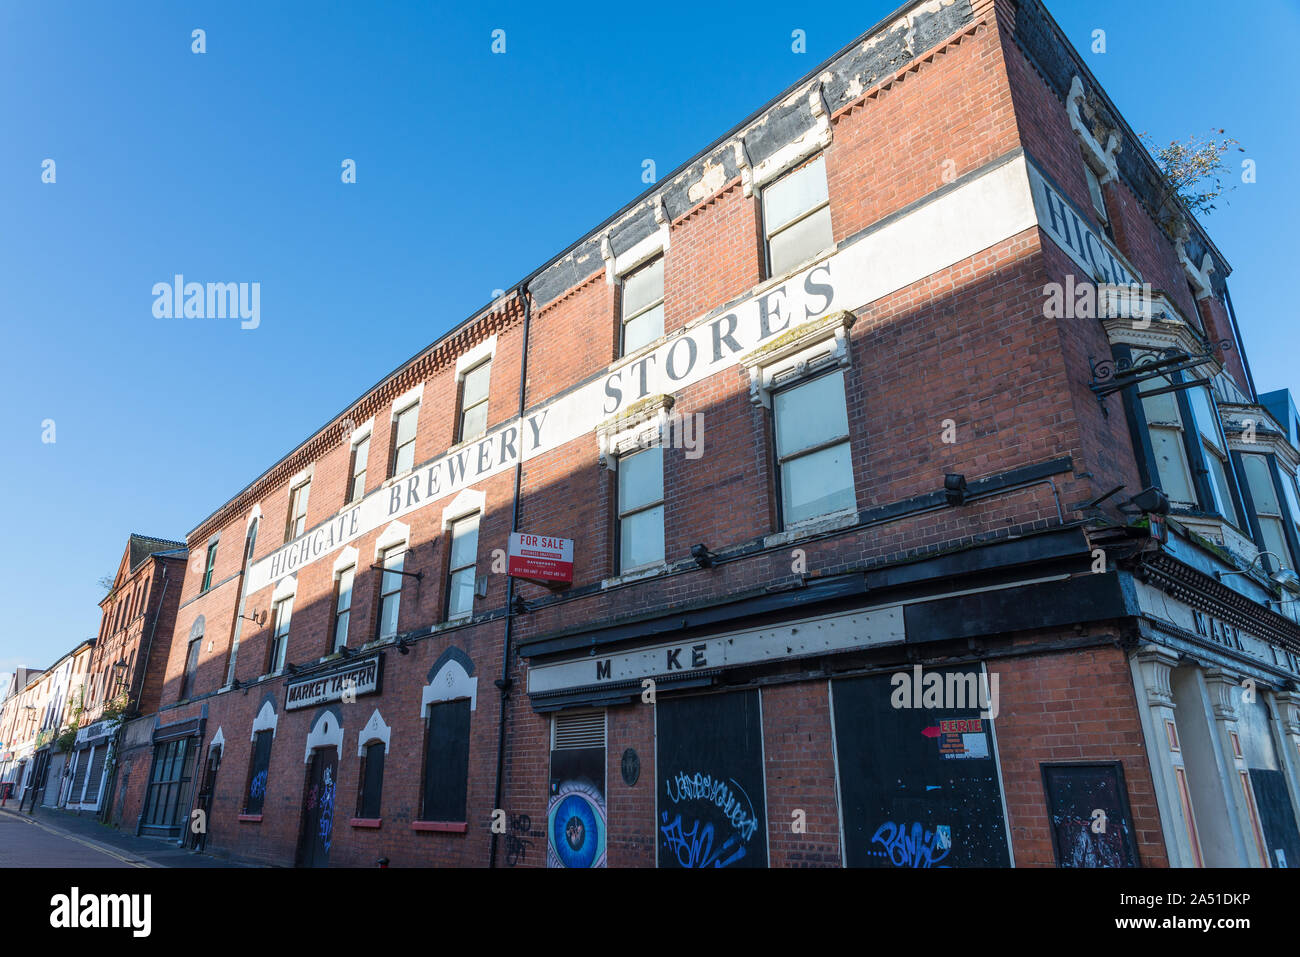 Derelict building which used to house Market Tavern pub and Highgate Brewery Stores in George Street, Walsall in the West Midlands, UK Stock Photo